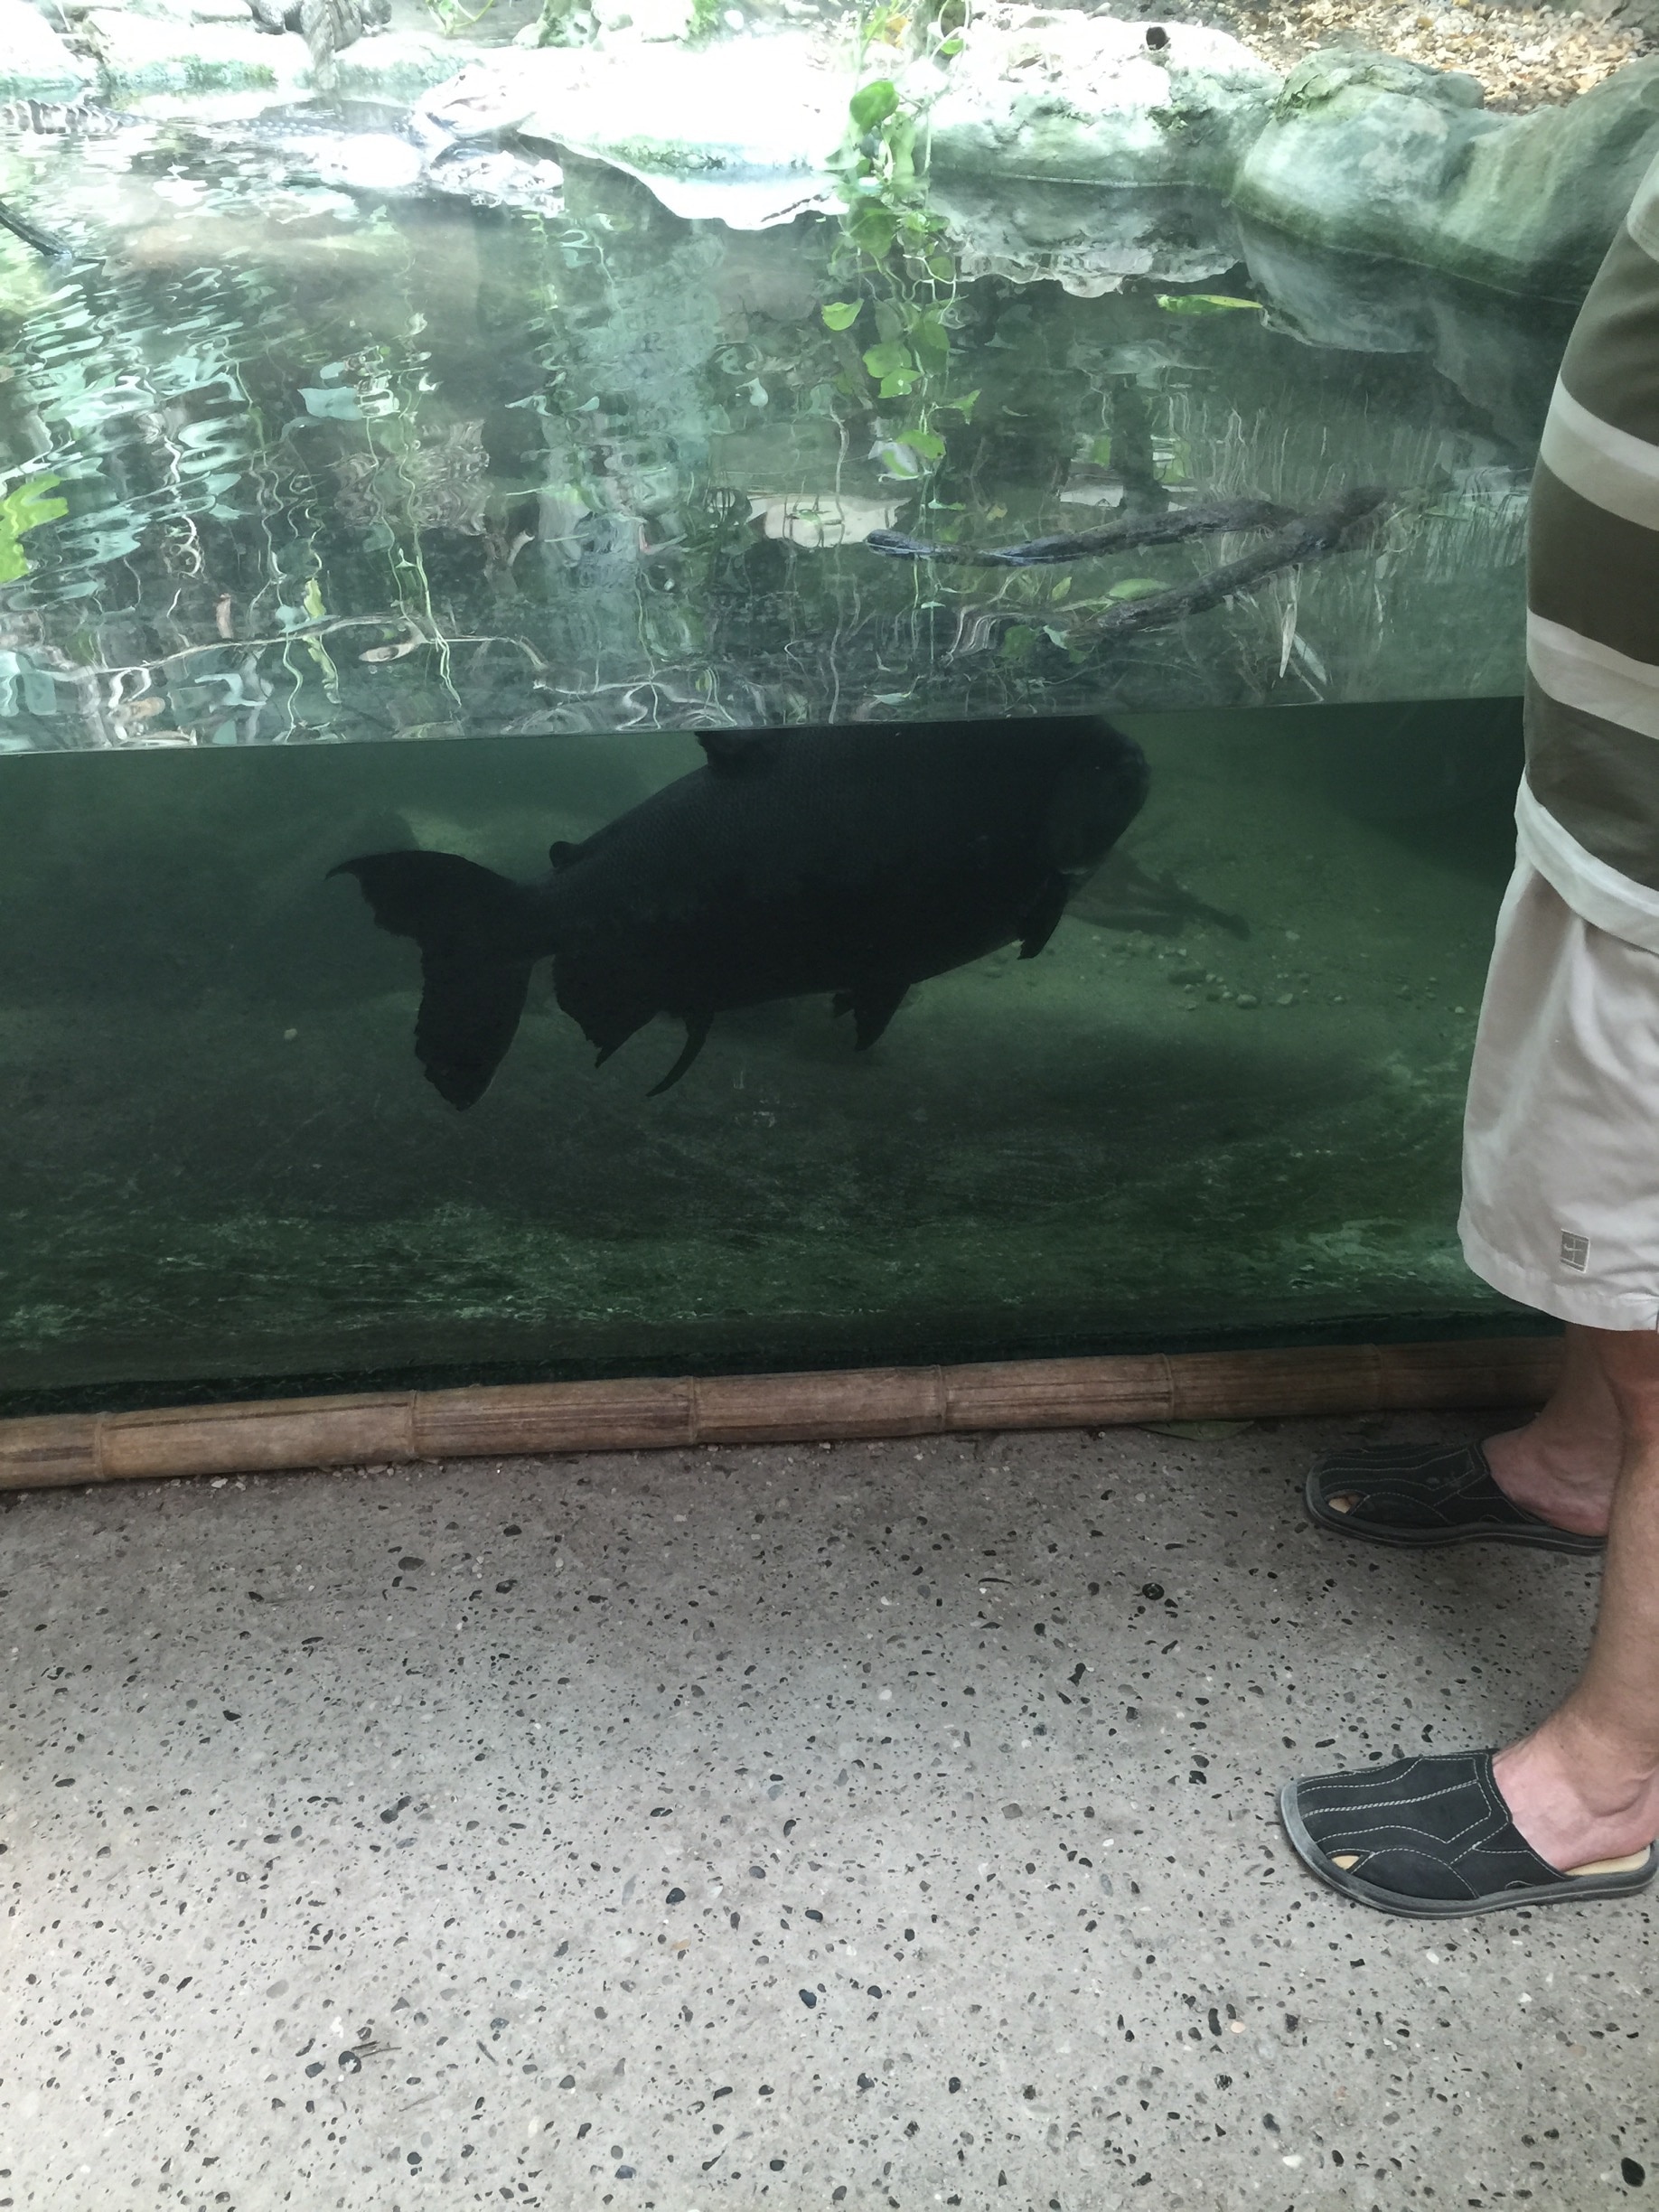 Look at the size of the Piraña in Aquarium, living with some Camen Crocodiles. Now that wouldn't be water fun for us to be in but would be for them